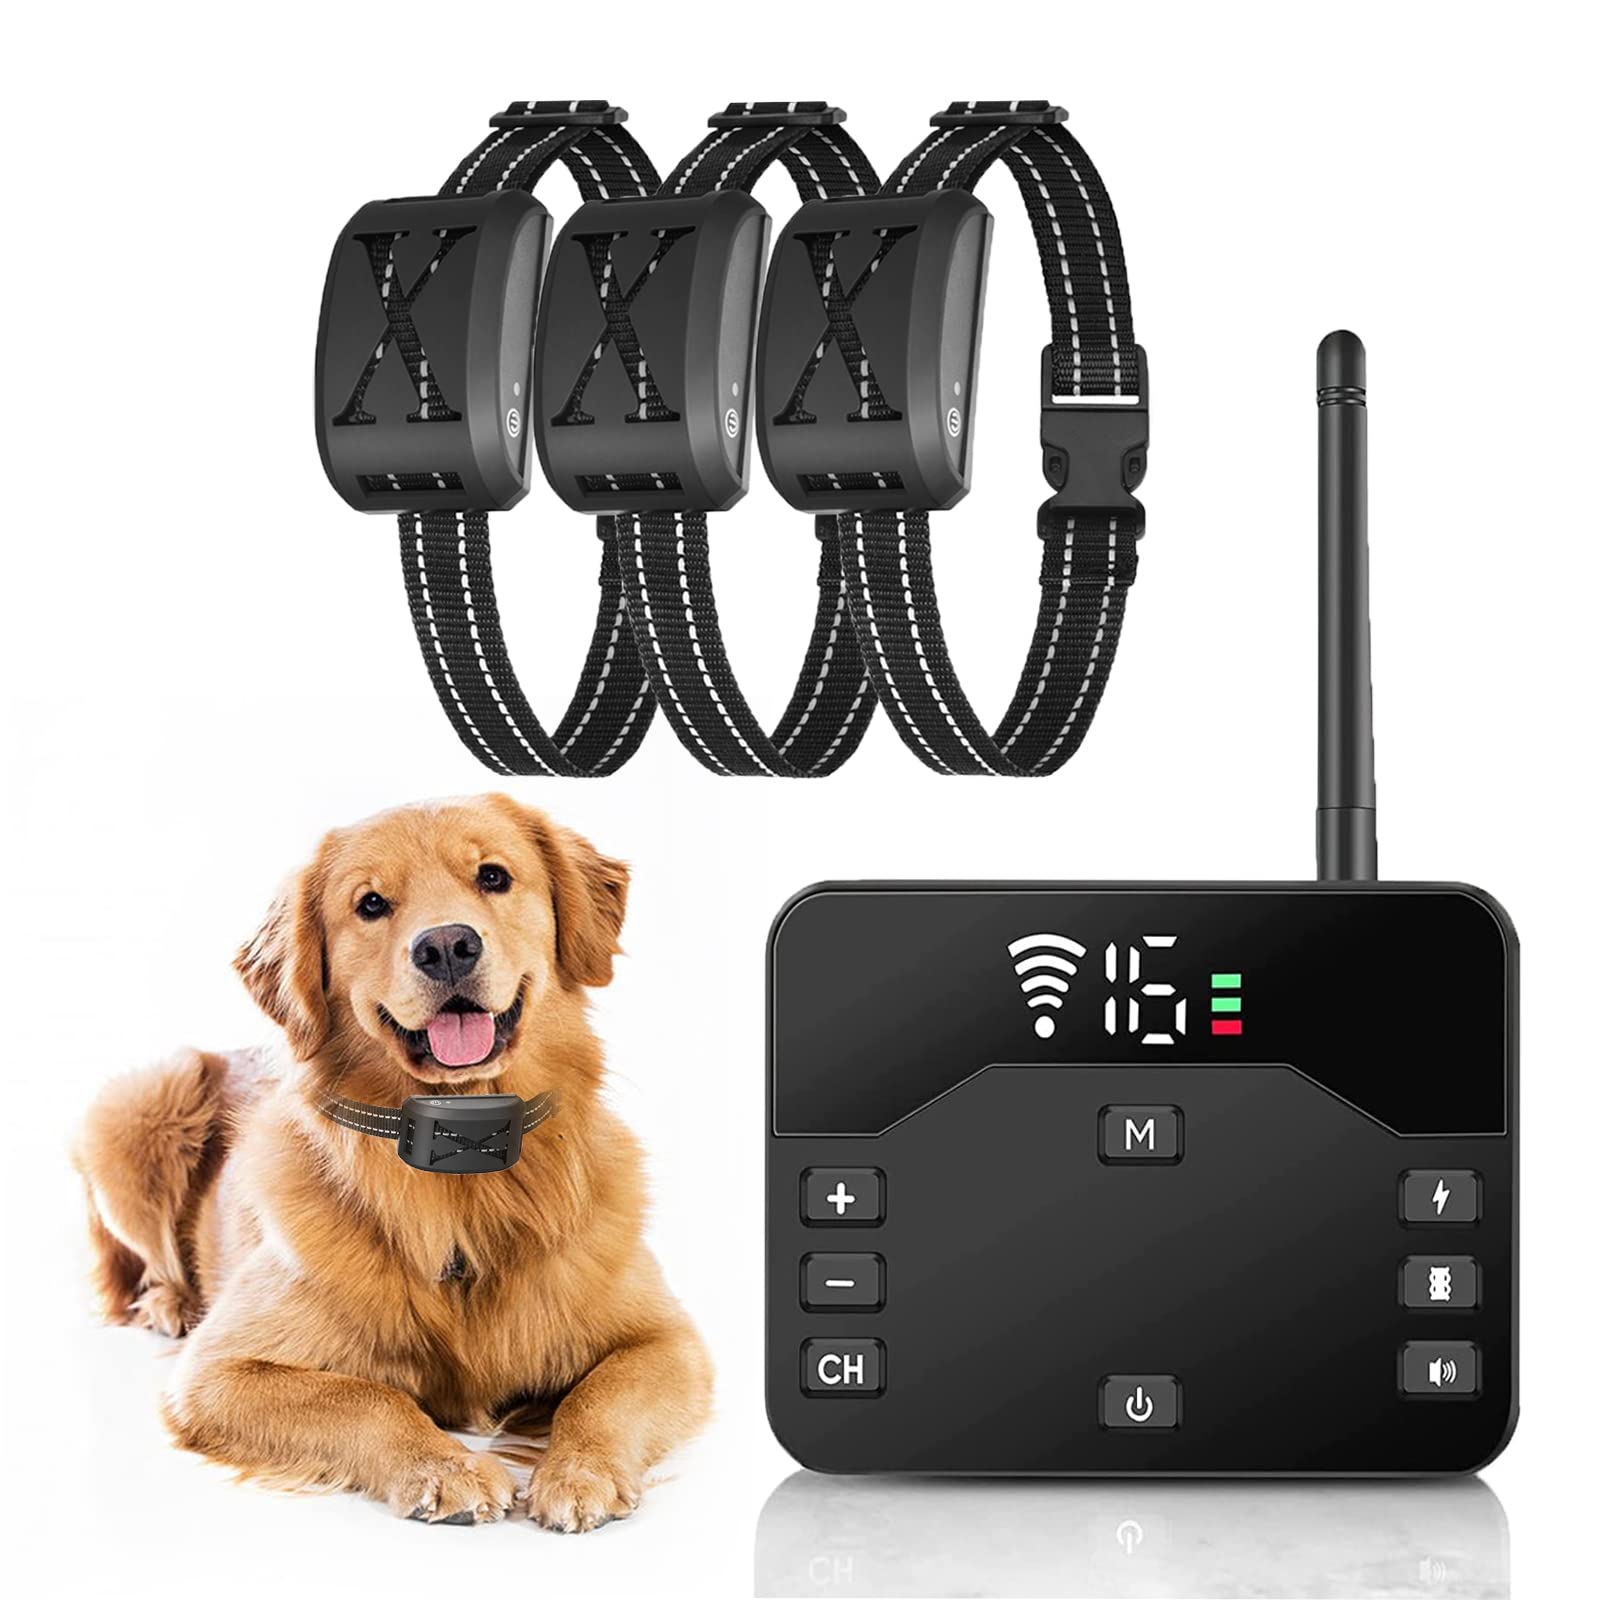 2-in-1 Wireless Dog Electric Fence, Pet safe Containment System, Shock Dog Training Collar Receiver with Remote Boundary,Adjustable Control Range, Rechargeable, Waterproof, for All Dogs,for3dogs